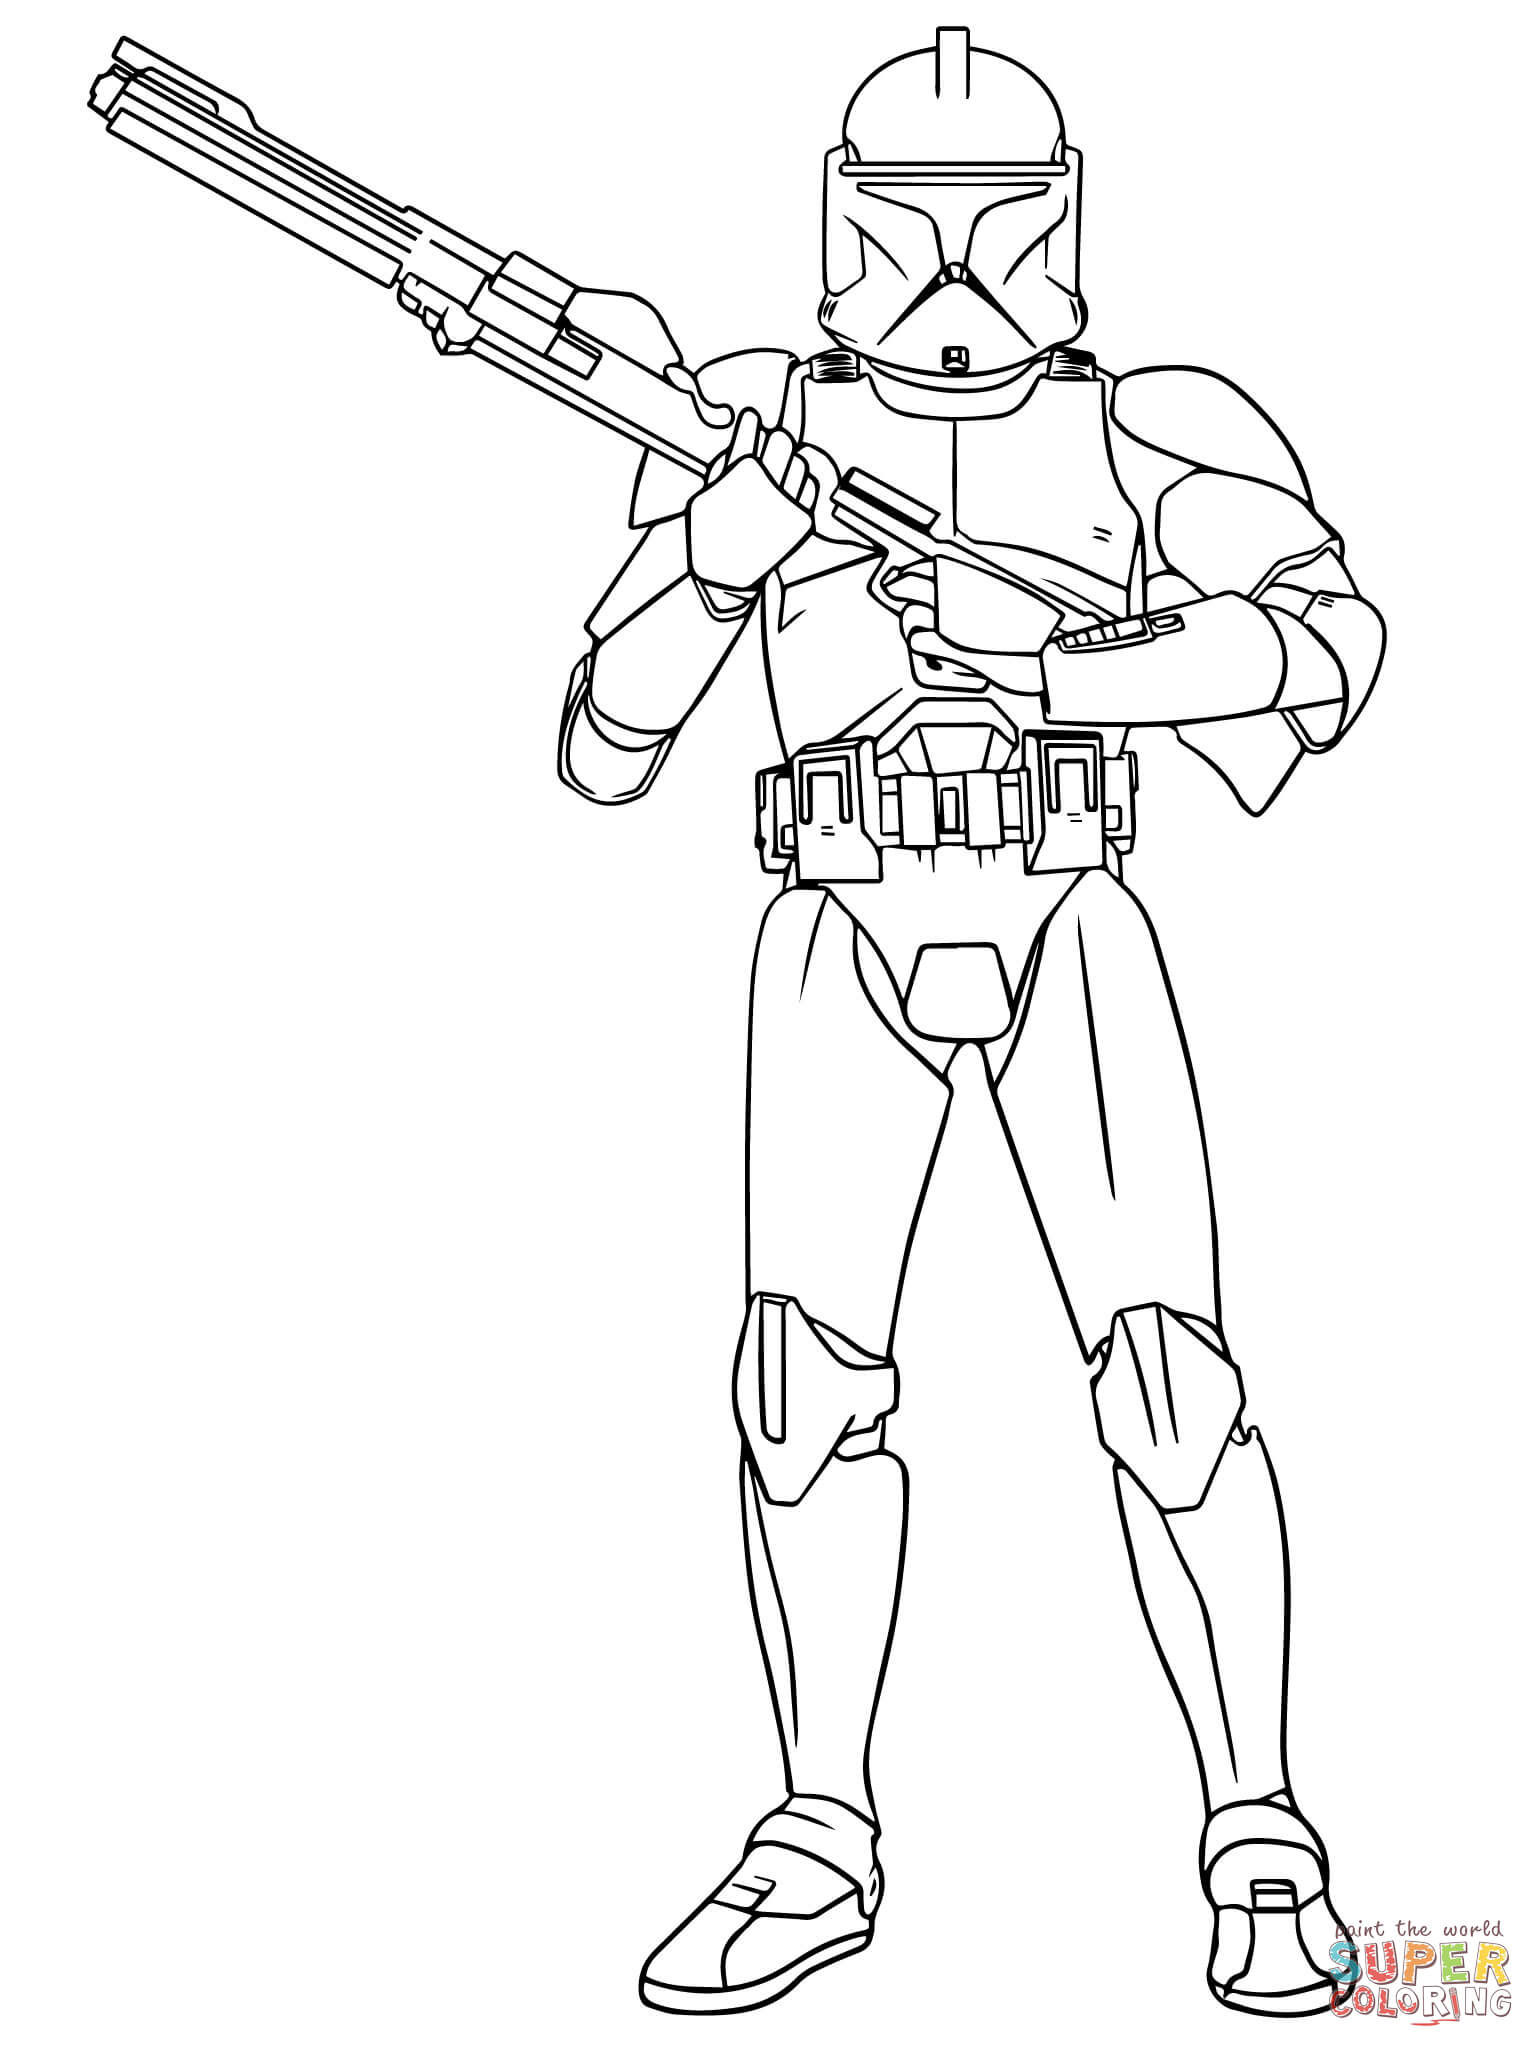 Boba Fett Coloring Page Boba Fett Coloring Page Free Printable Coloring Pages